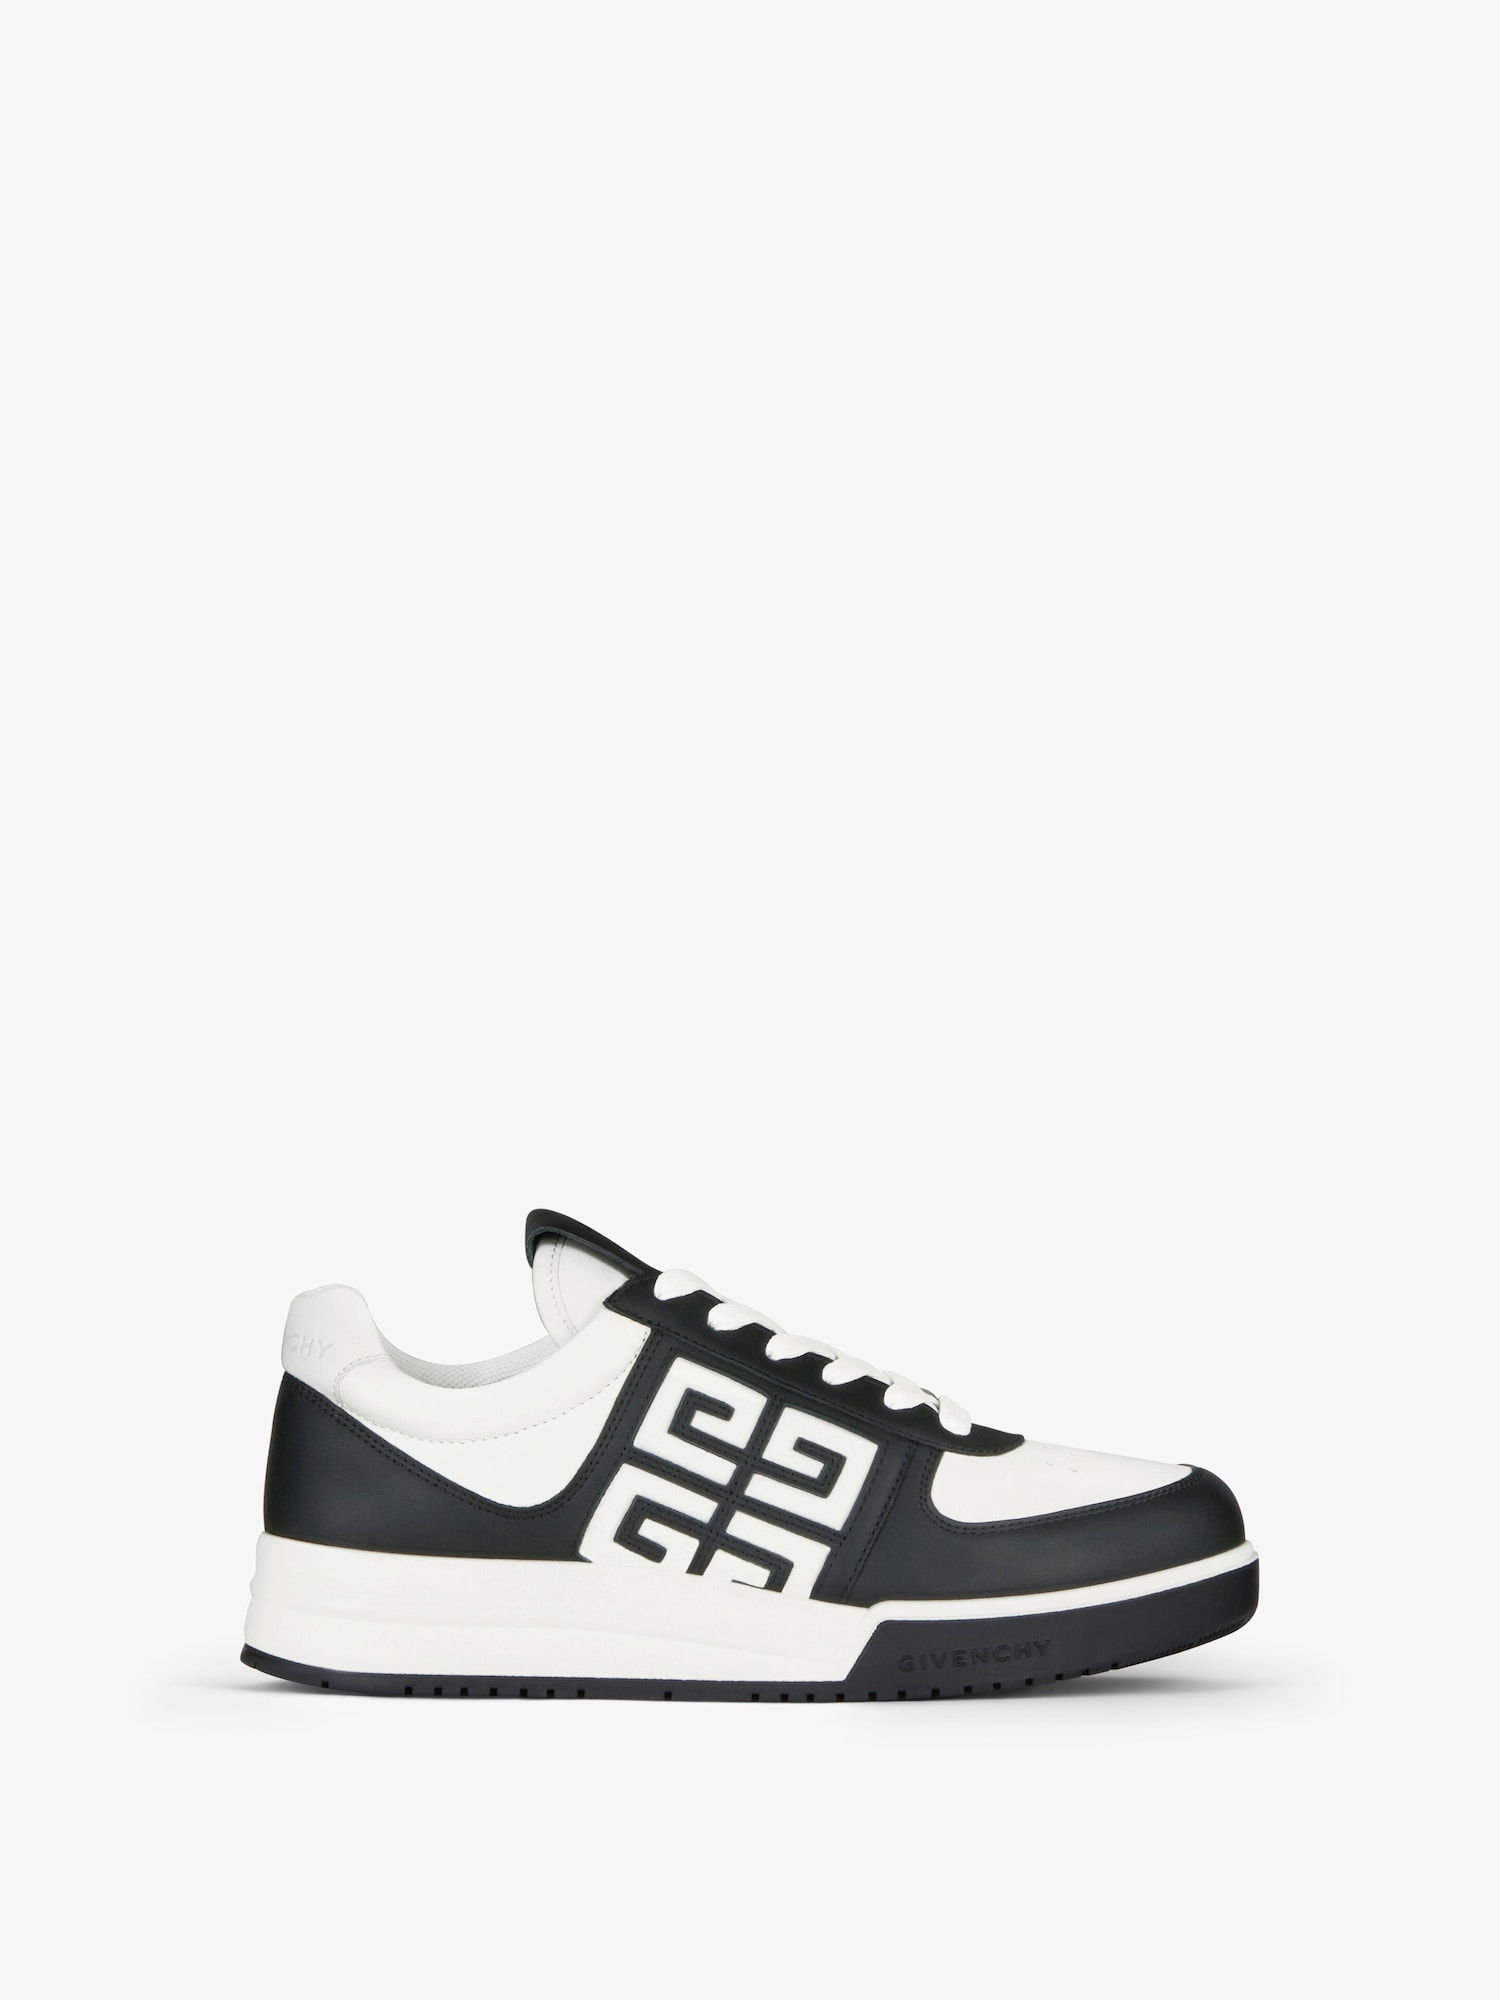 G4 sneakers in leather - black/white | Givenchy US